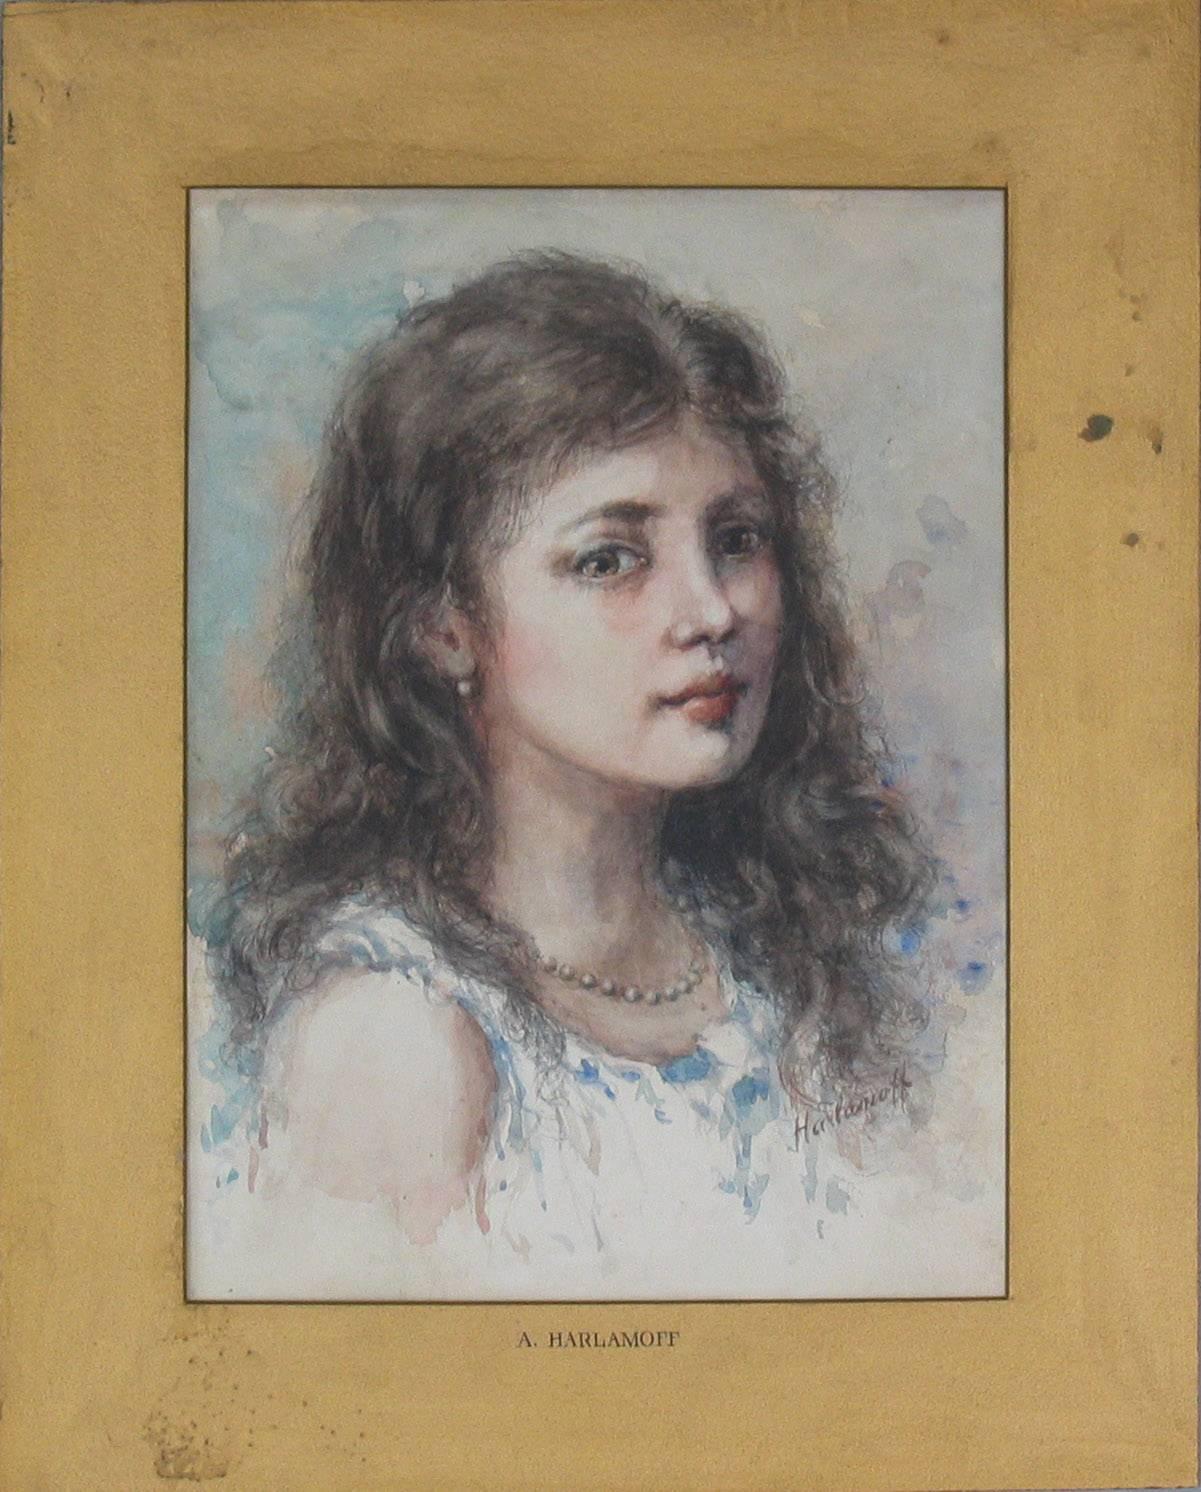 Watercolor in the manner of Alexei Alexeievitch Harlamoff "Russian, 1842-1915" portrait of a young girl, signed Harlamoff on the lower right, Marked A. Harlamoff on the gold matting. A watercolor done on paper. The painting measures